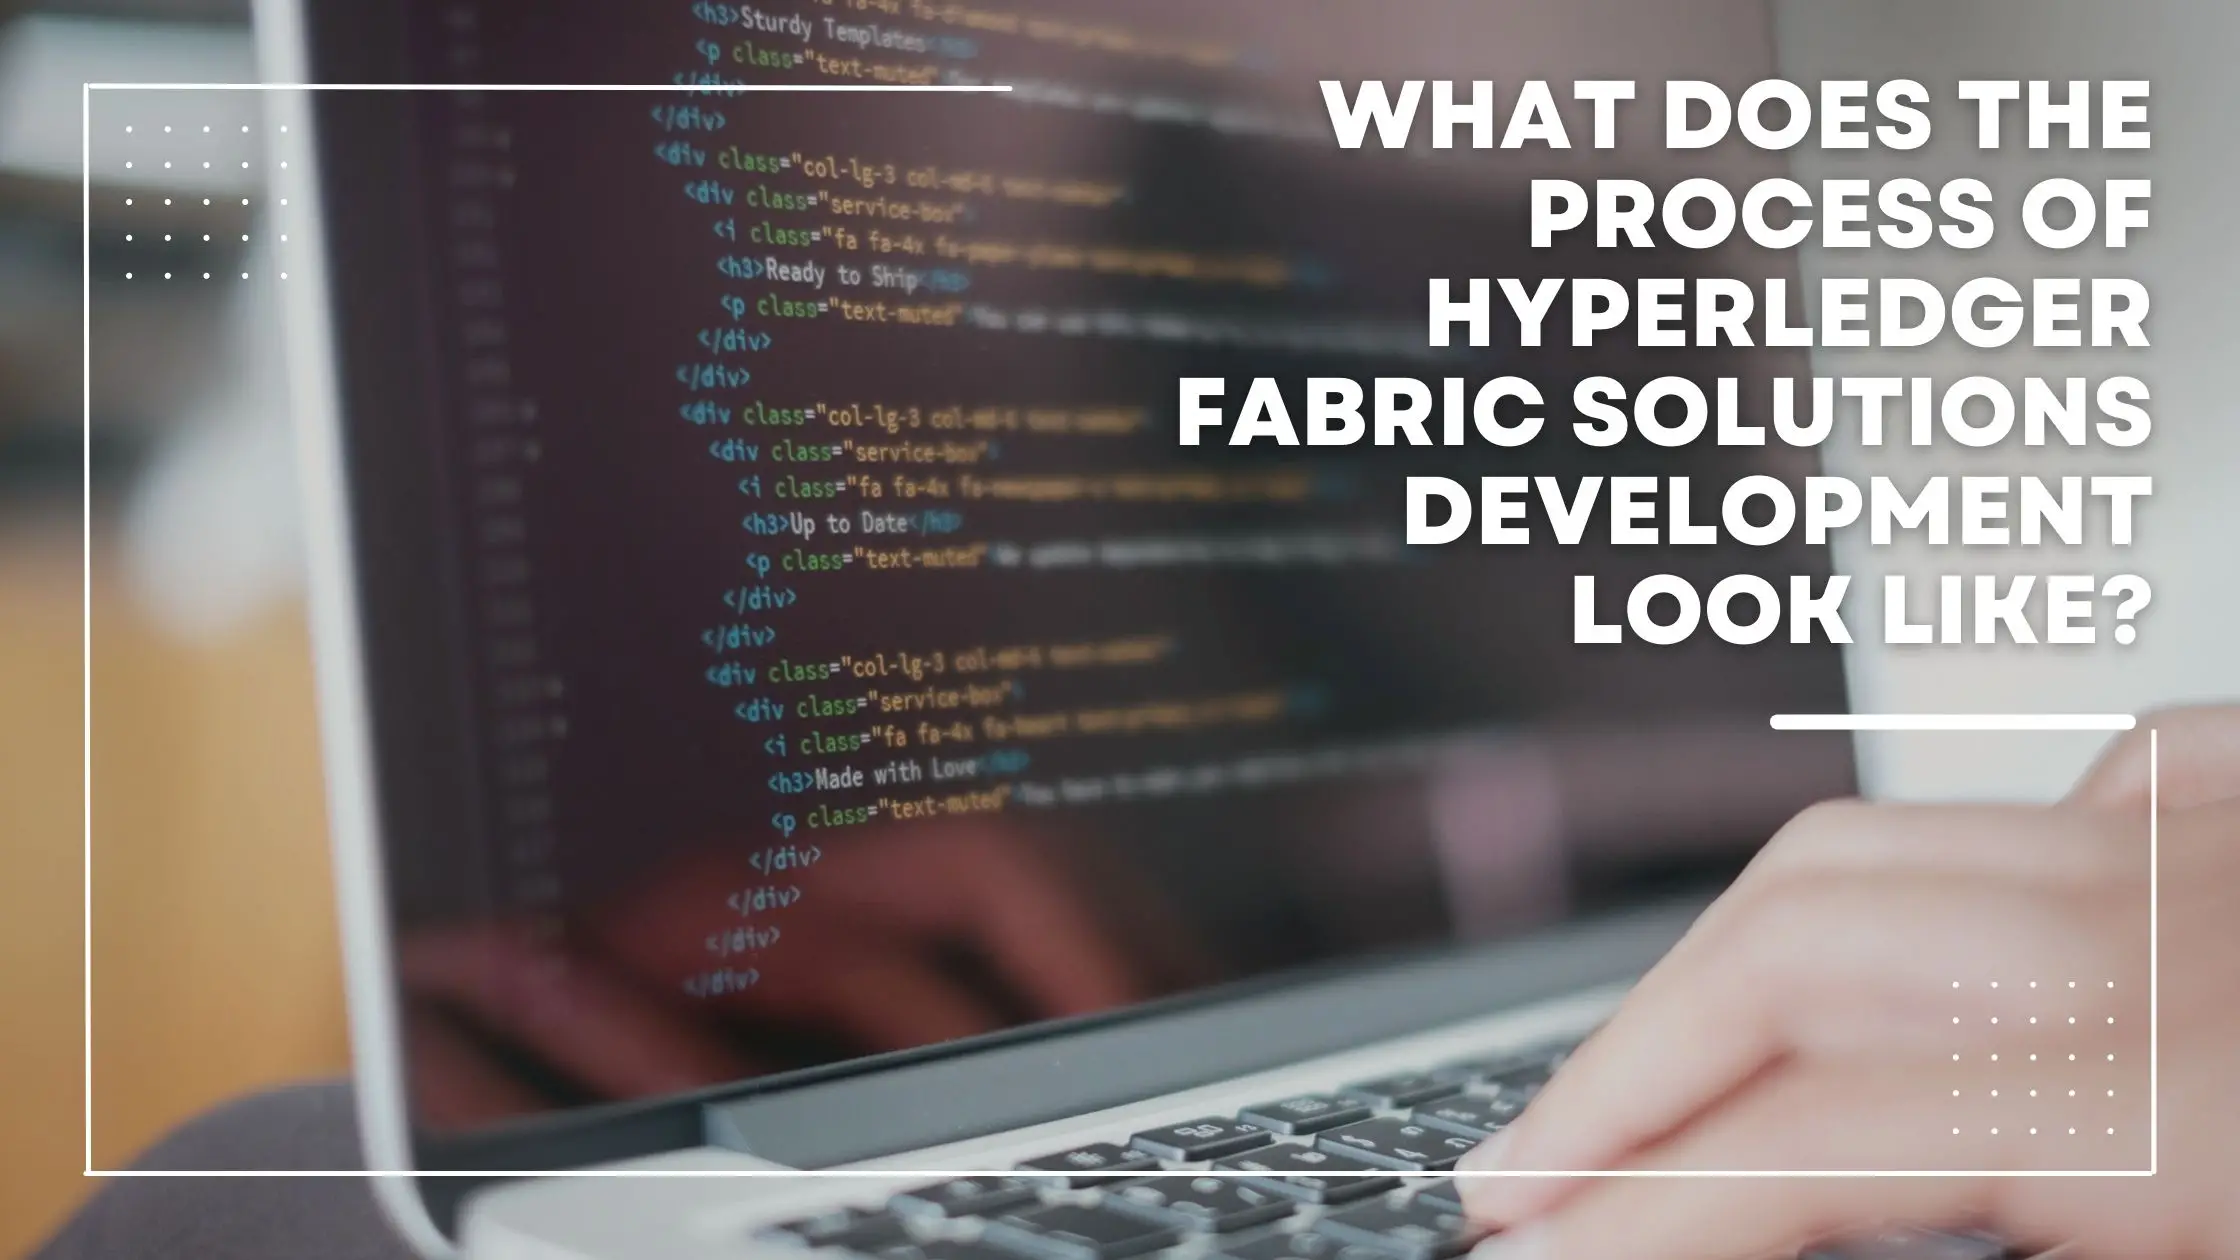 What does the process of hyperledger fabric solutions development look like?